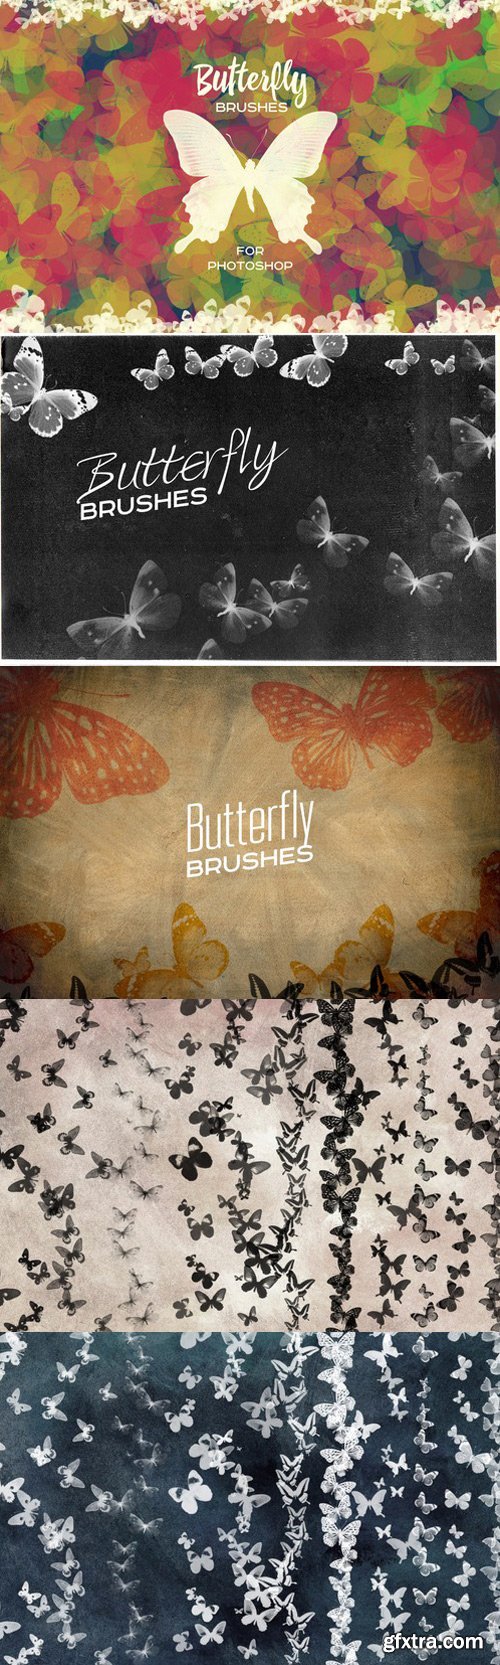 CM - Butterfly Brushes For Photoshop 339486